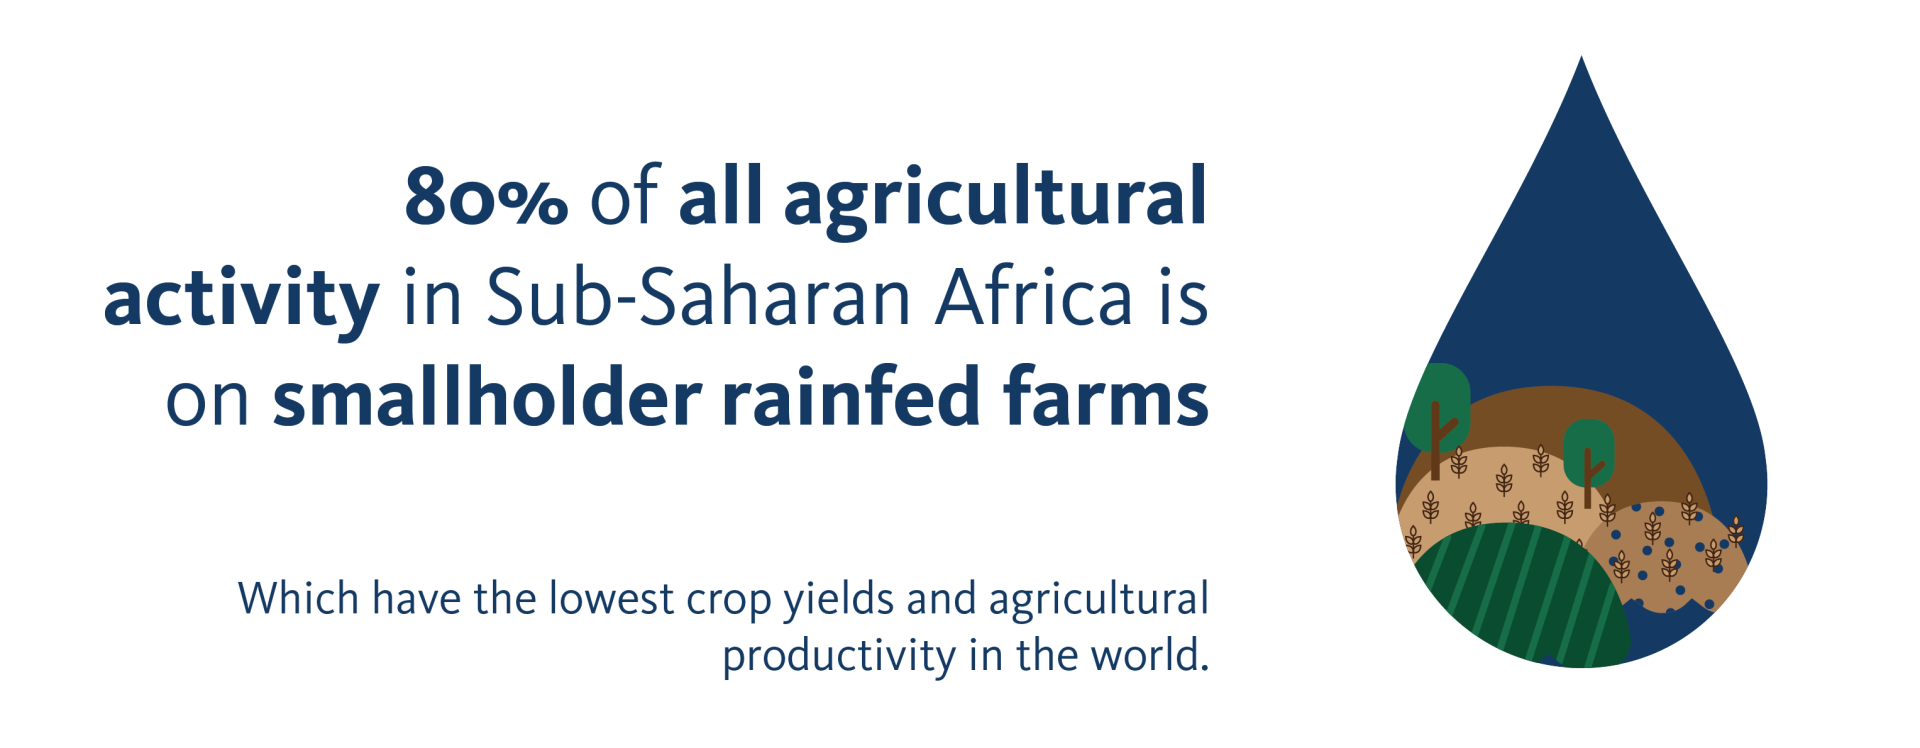 80% of all agricultural activity in Sub-Saharan Africa is on smallholder rainfed farms